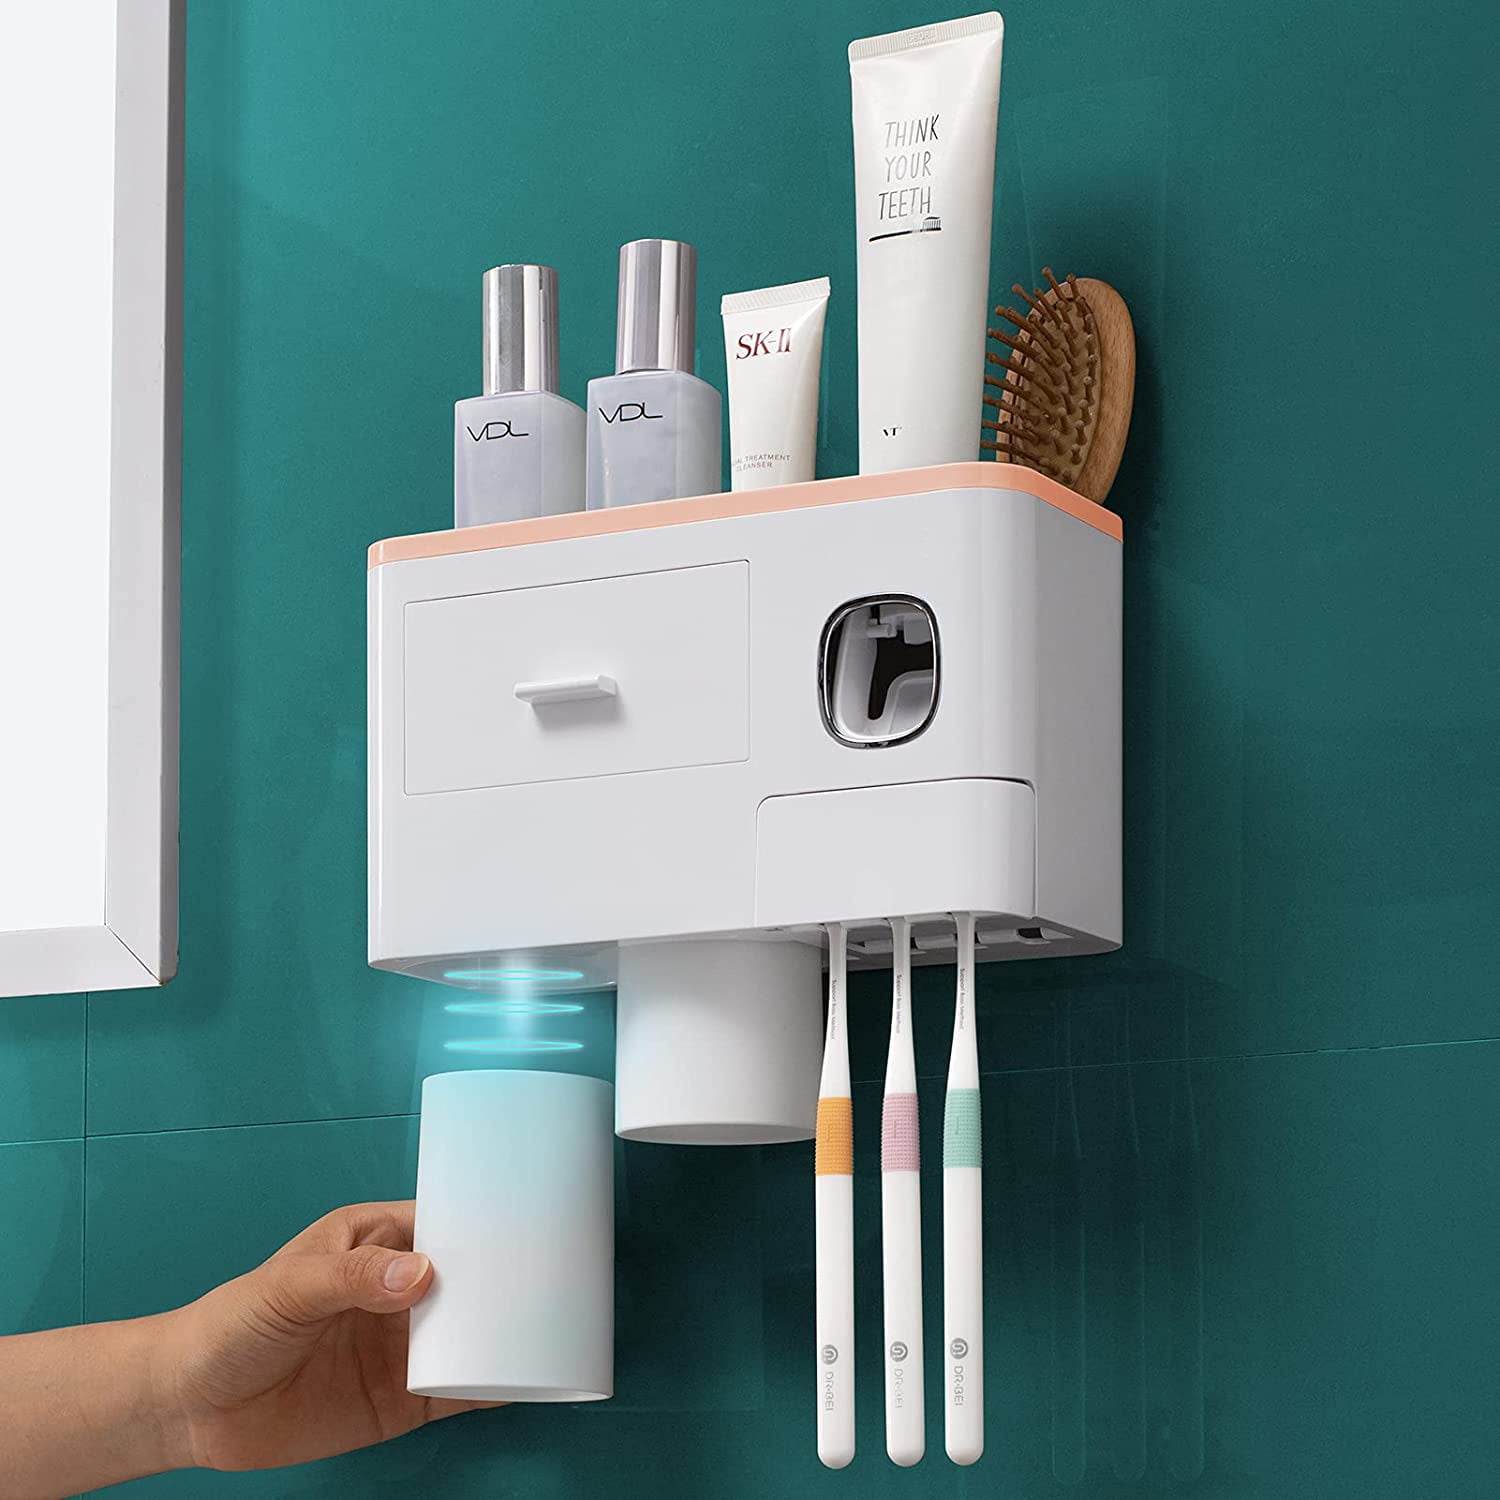 Stusgo Toothbrush Holder Wall Mounted, Multifunctional Space-Saving Automatic Toothpaste Dispenser Squeezer Kit, 4 Toothbrush Slots,2 Cups and Drawers